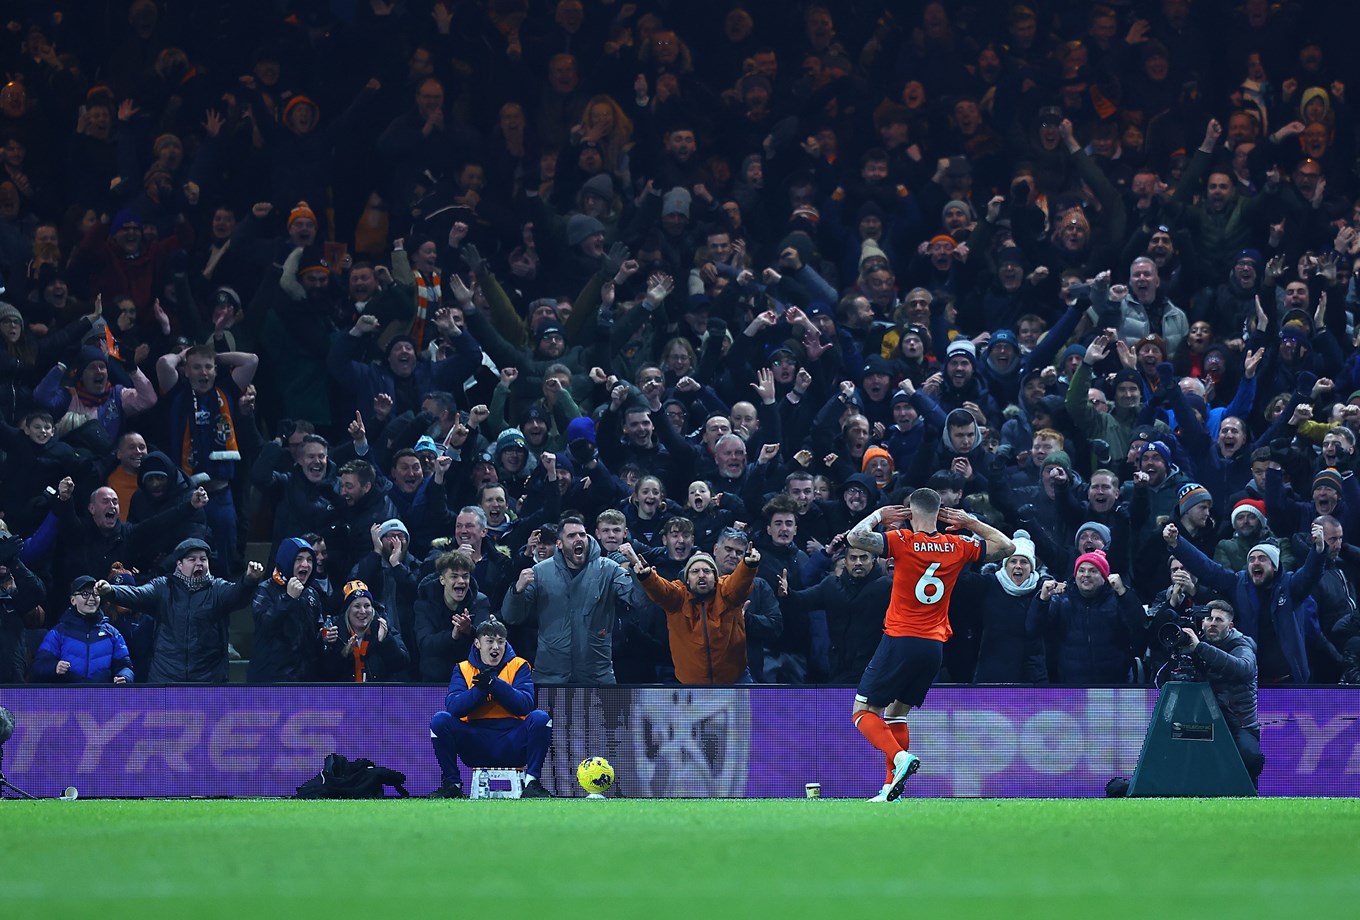 Ross Barkley celebrating in-front of the Luton Town fans after his goal against Arsenal.